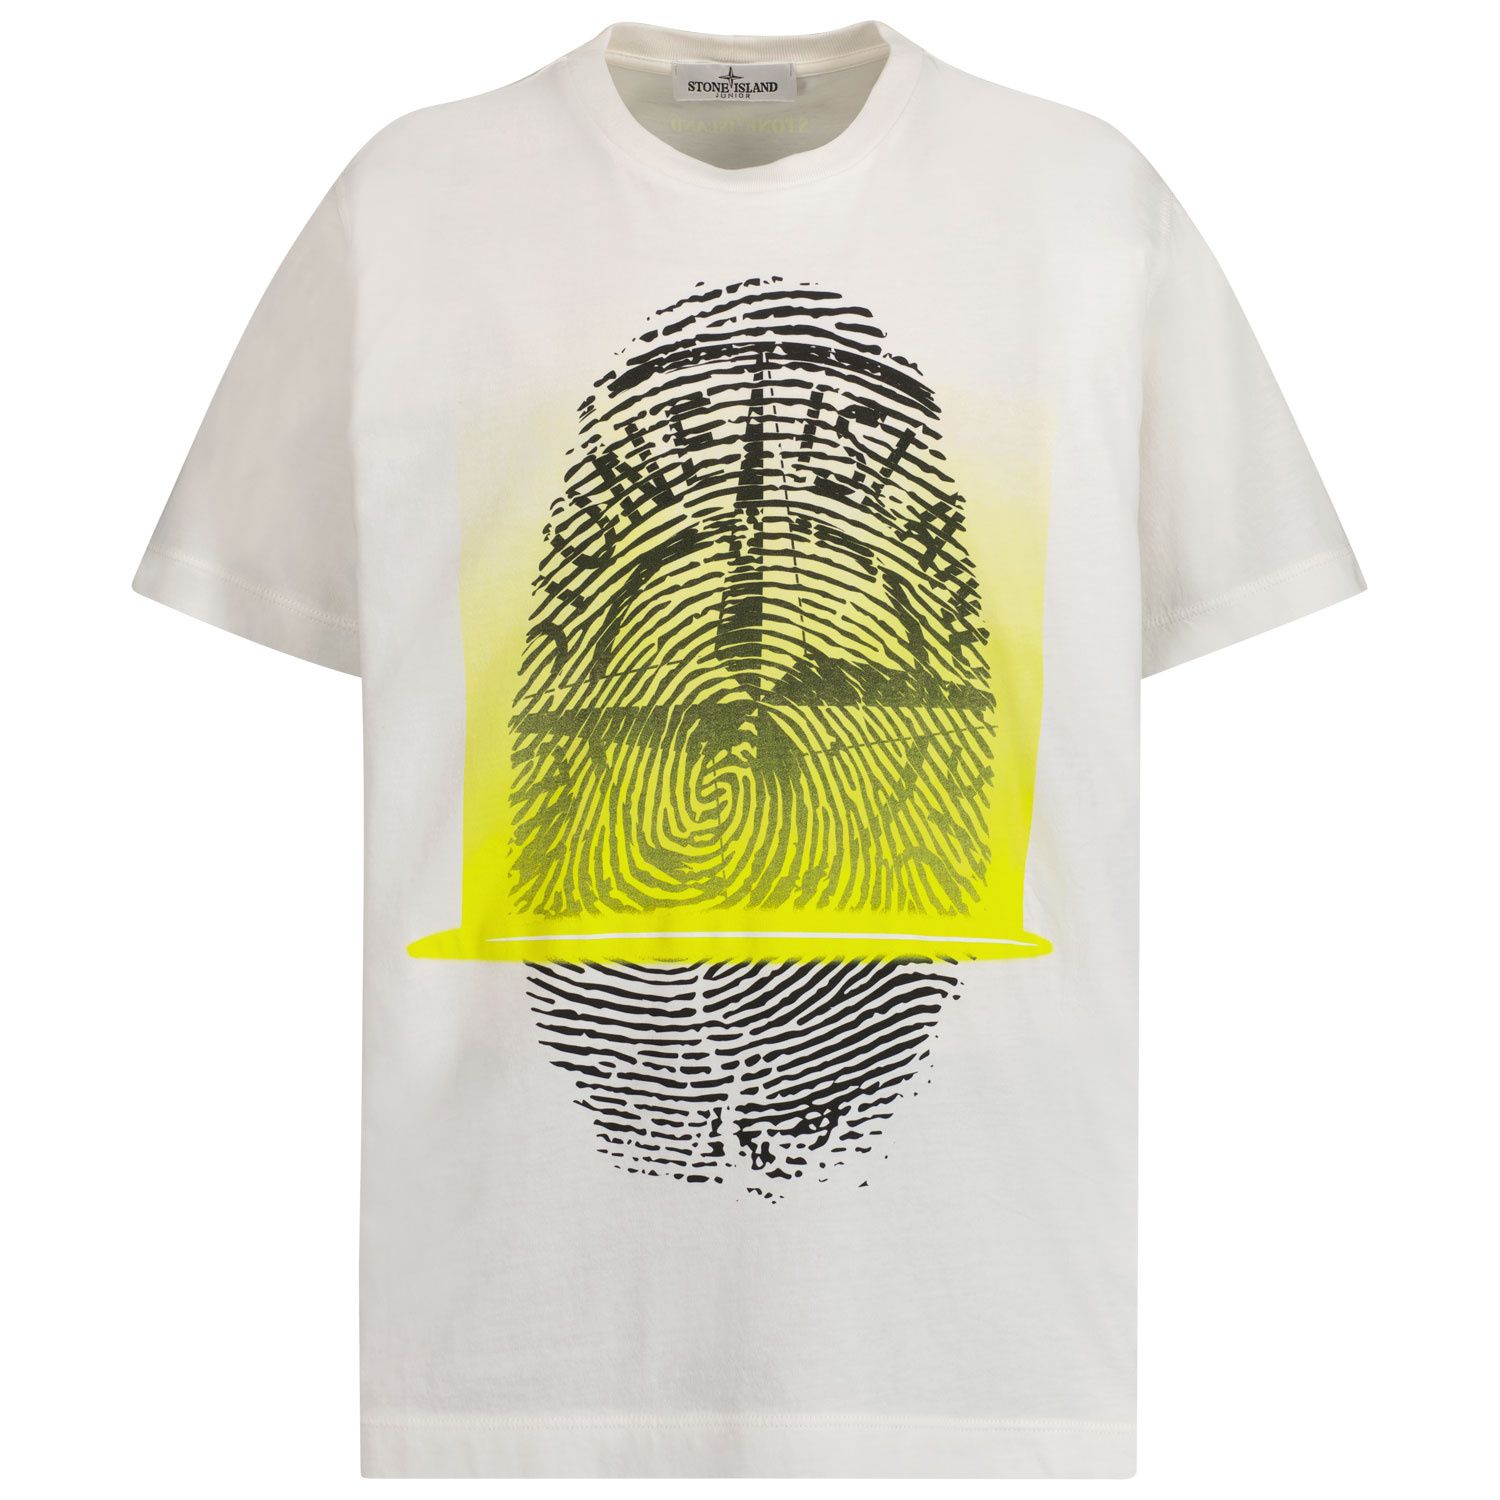 Picture of Stone Island 771621053 kids t-shirt white